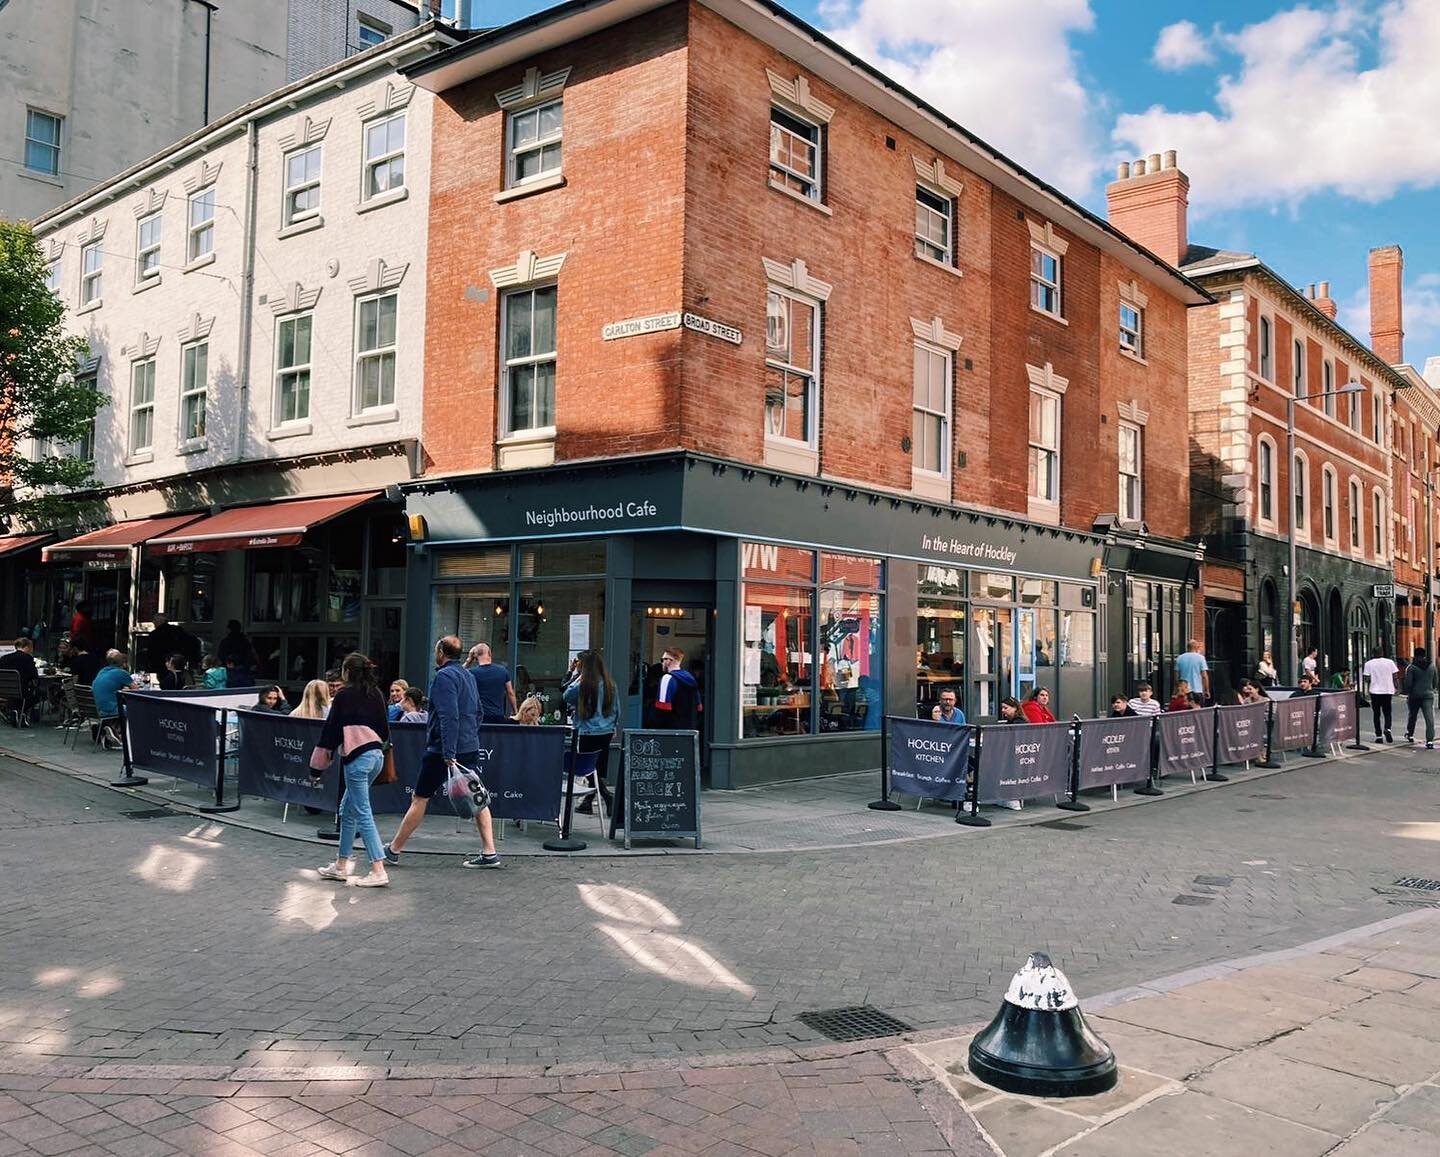 Hockley in a sunny afternoon, what a wonderful place to be ☀️ 
.
.
.
.
.
.
.
.
.
.
.
.
.
#nottingham #notts #lovenotts #indienotts #visitnottingham #cafe #hockley #cafes #breakfast #brunch #lunch #cake #coffee #cakeandcoffee #shoplocal #indepedent #v